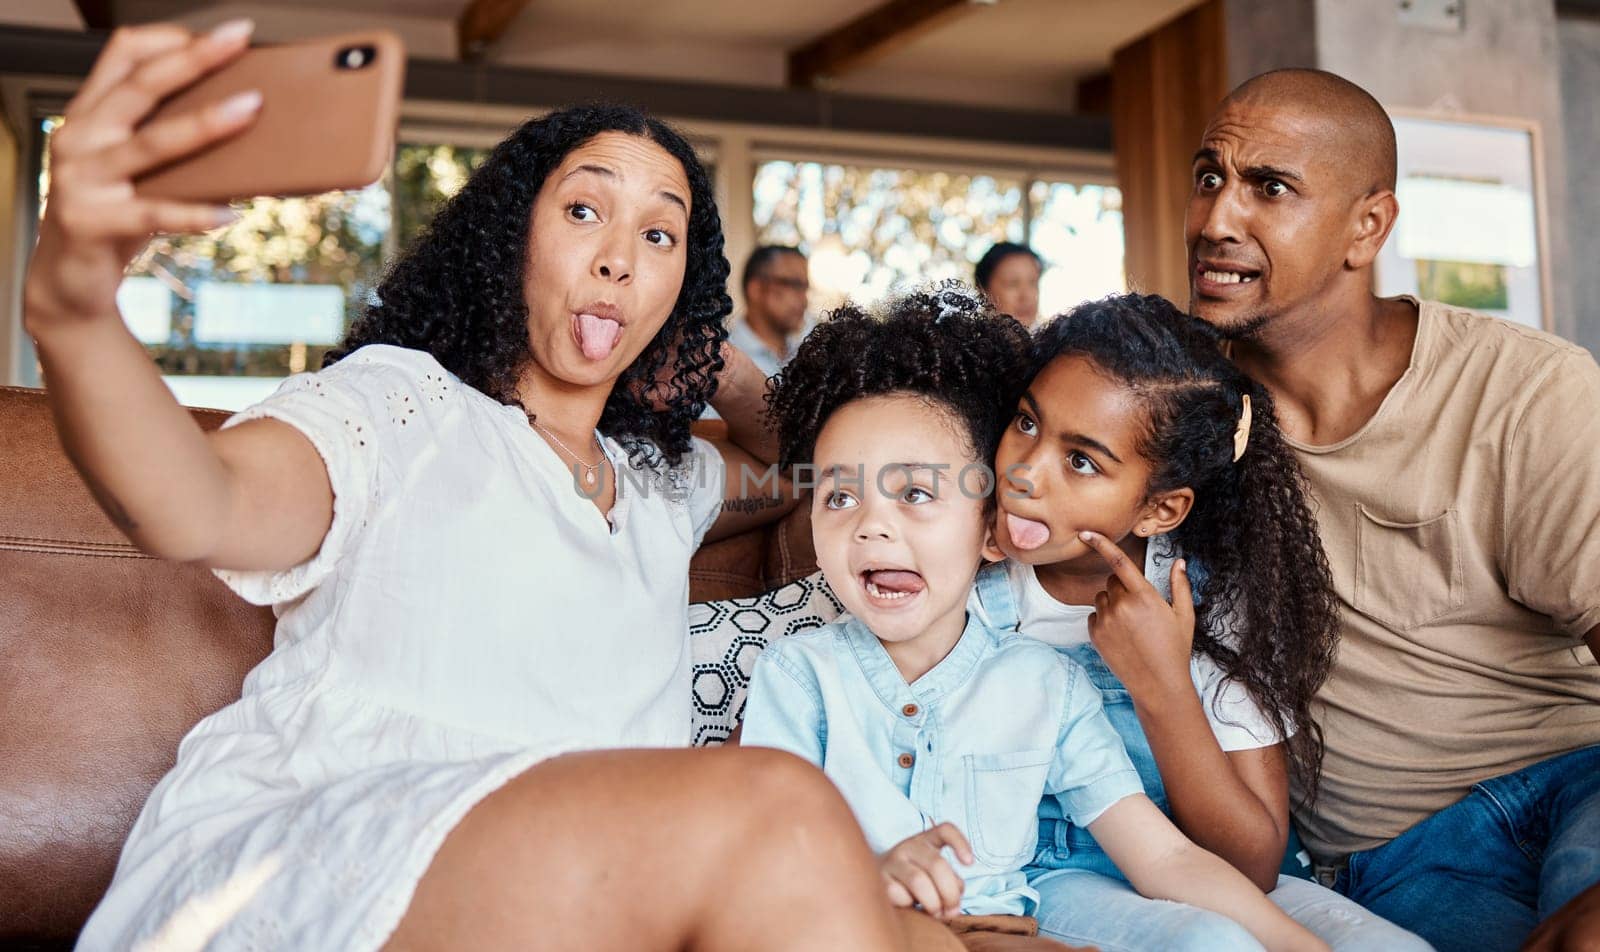 Family, funny face and selfie with tongue out in home, having fun and bonding together. Interracial, comic photography and father, mother and girls taking pictures for social media and happy memory